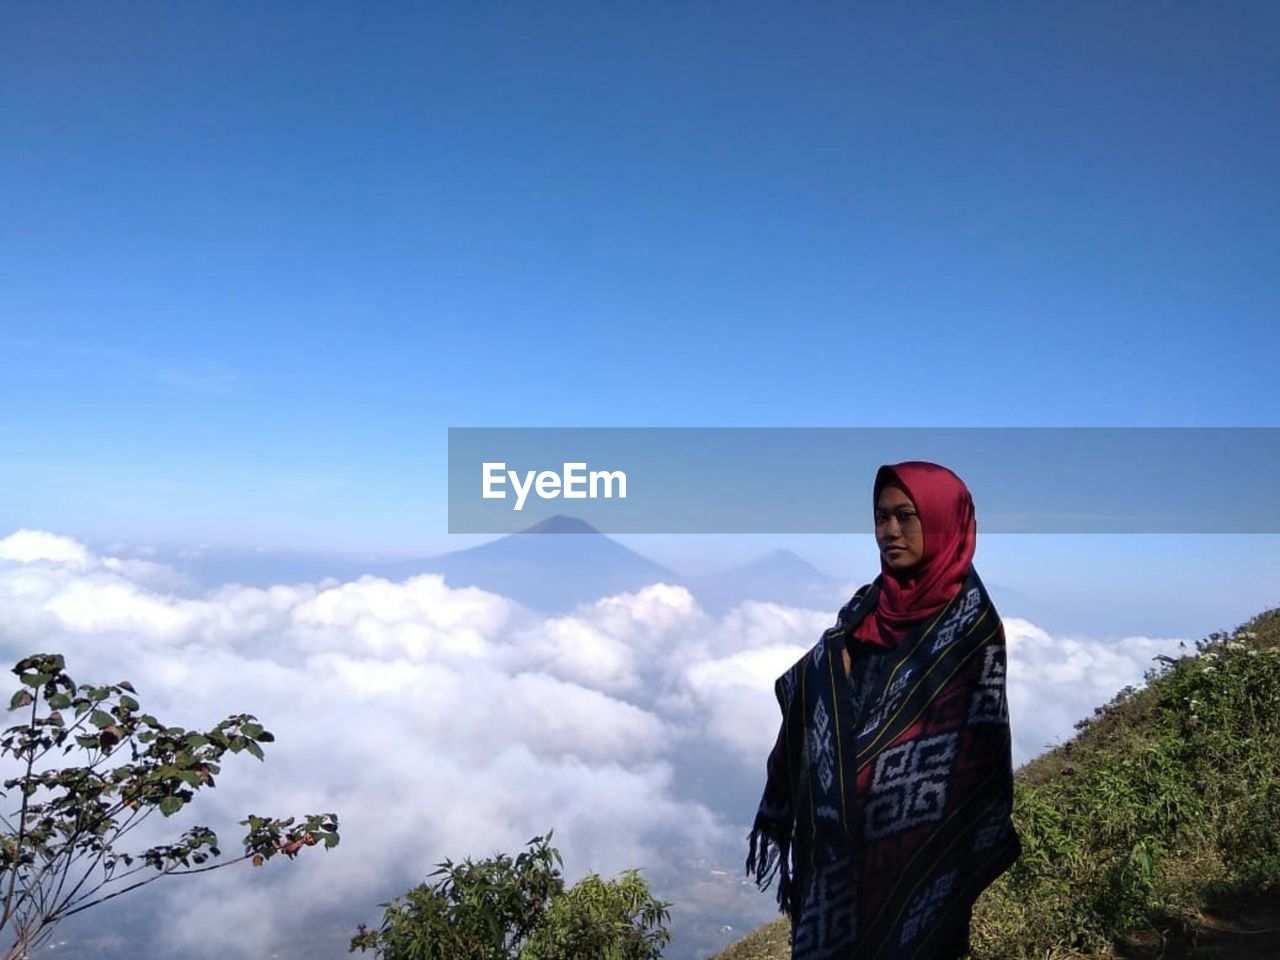 Woman wearing hijab standing on mountain against blue sky